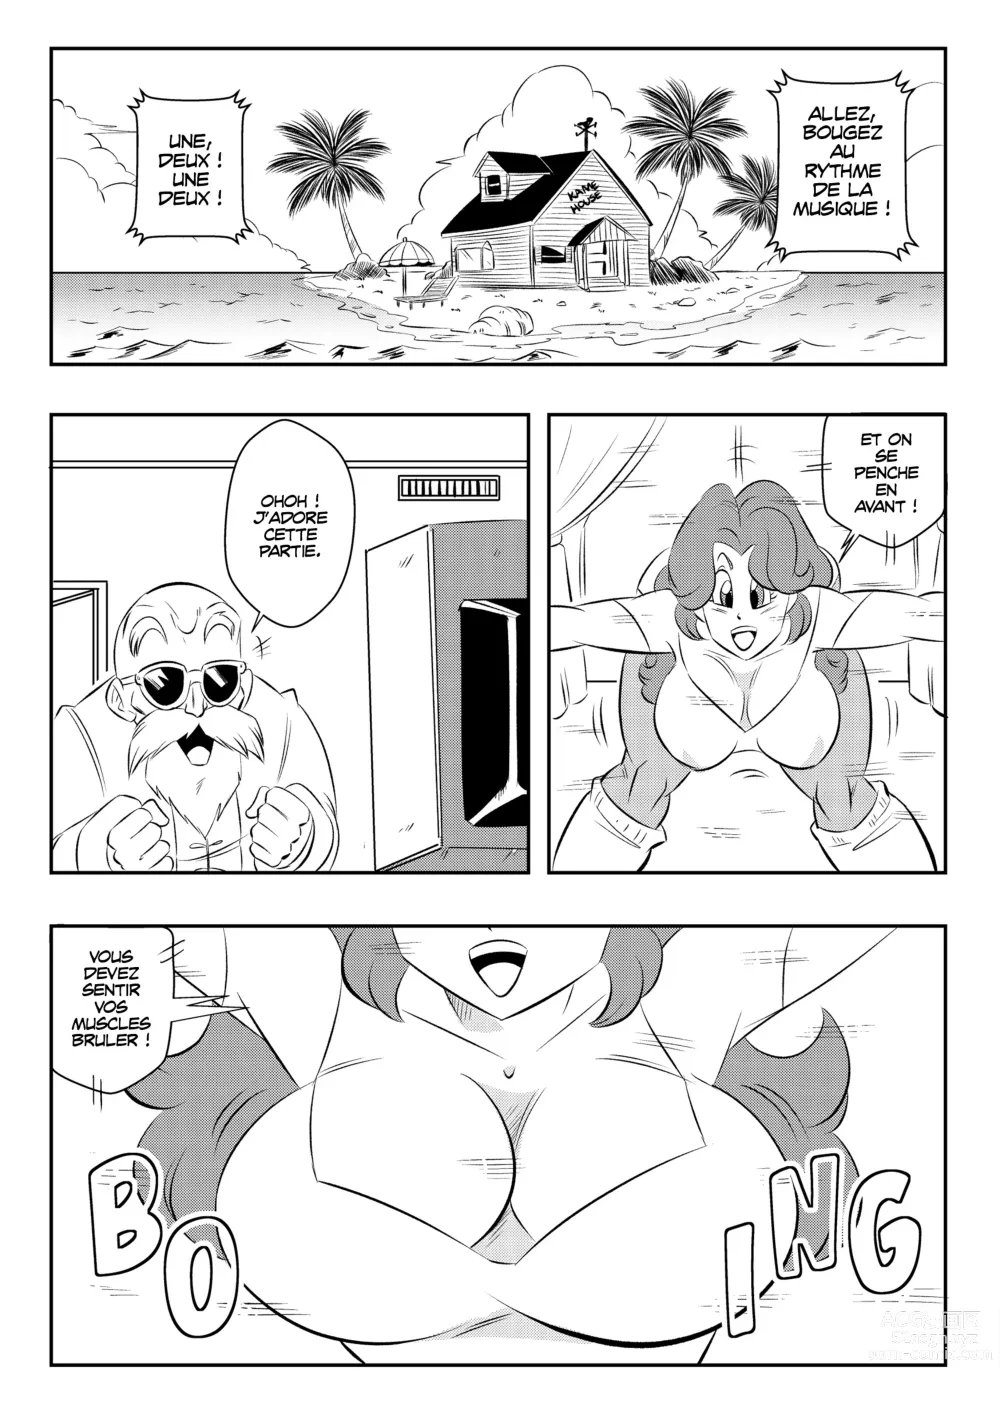 Page 3 of doujinshi perfect broascast